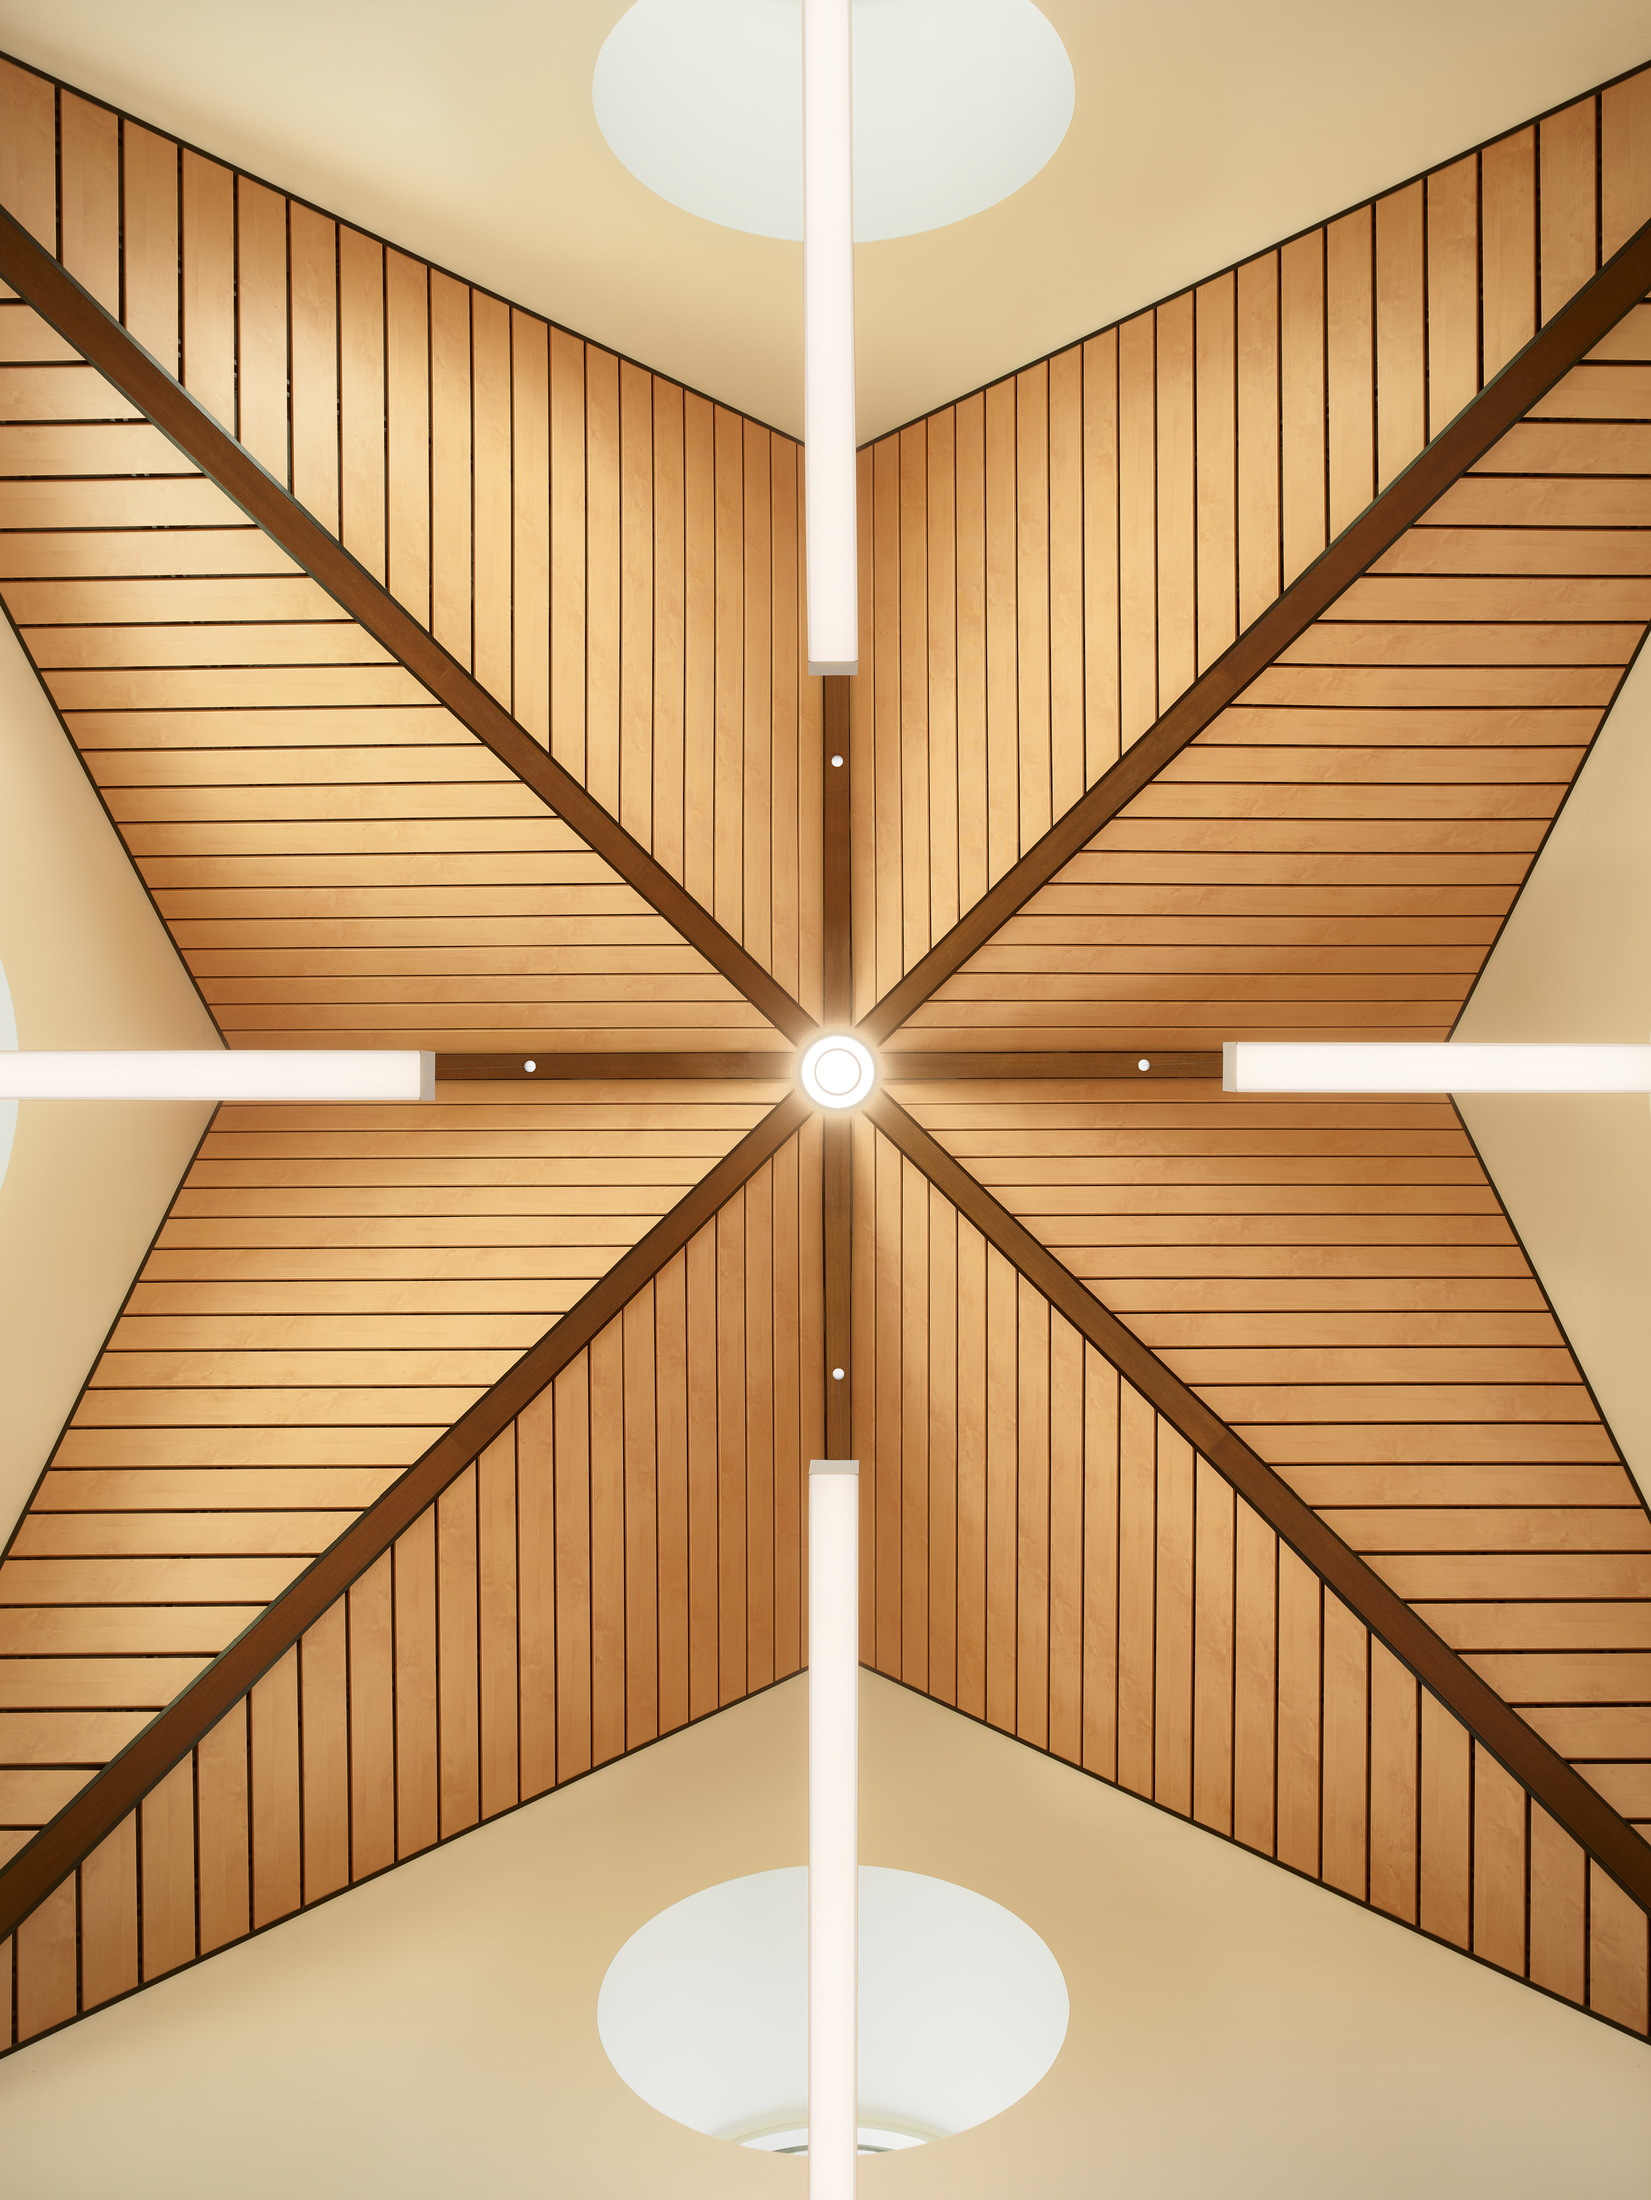 ceiling detail at the Madonna Rehabilitation Hospital resembling a four point star